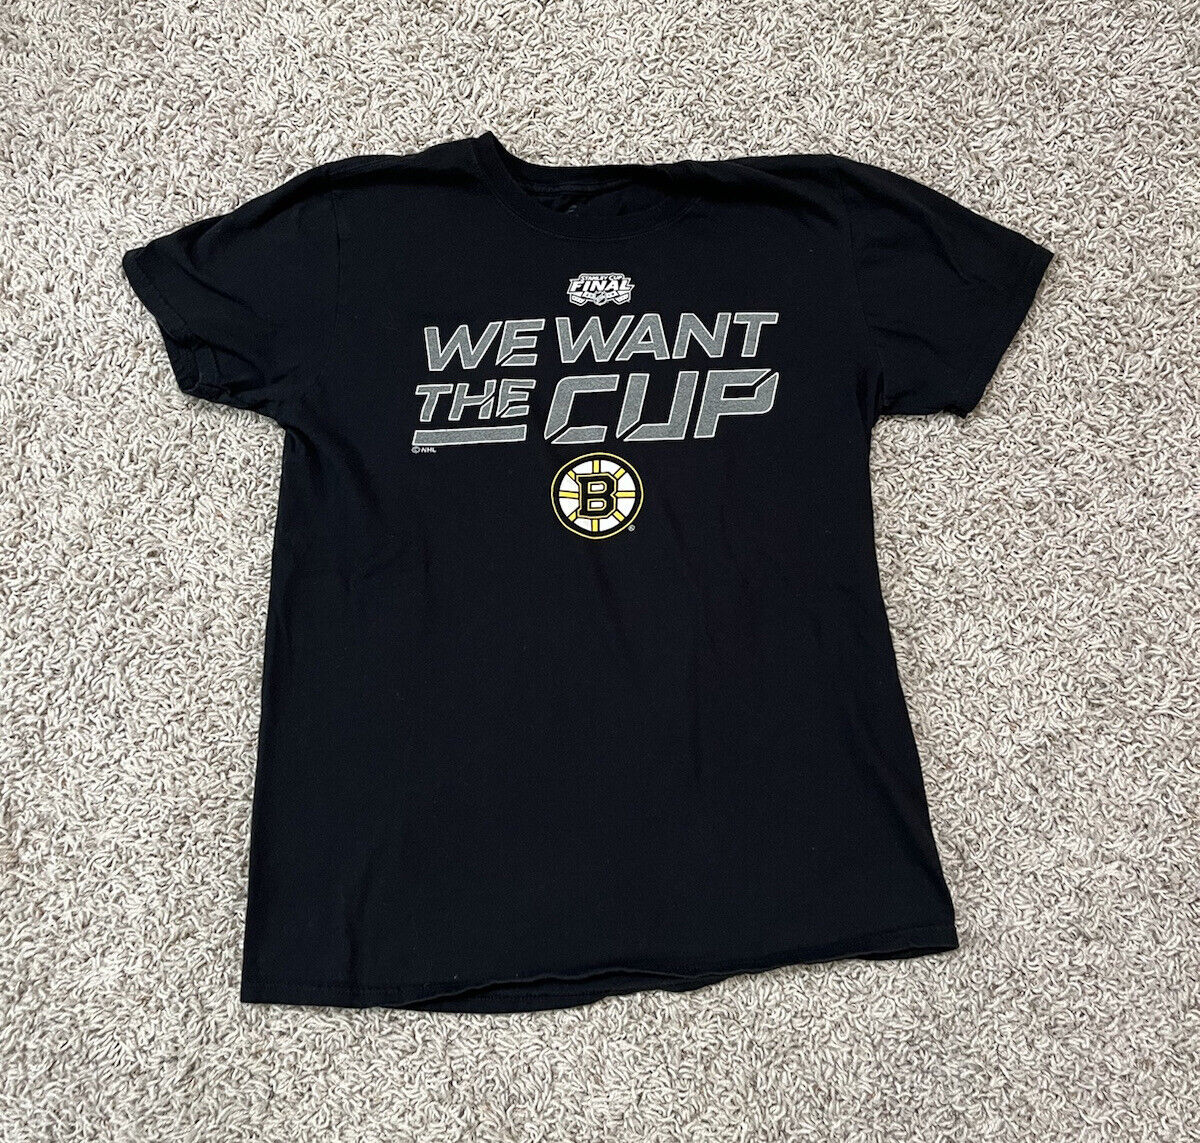 2019 STANLEY CUP BOSTON BRUINS TEE SHIRT (SMALL)